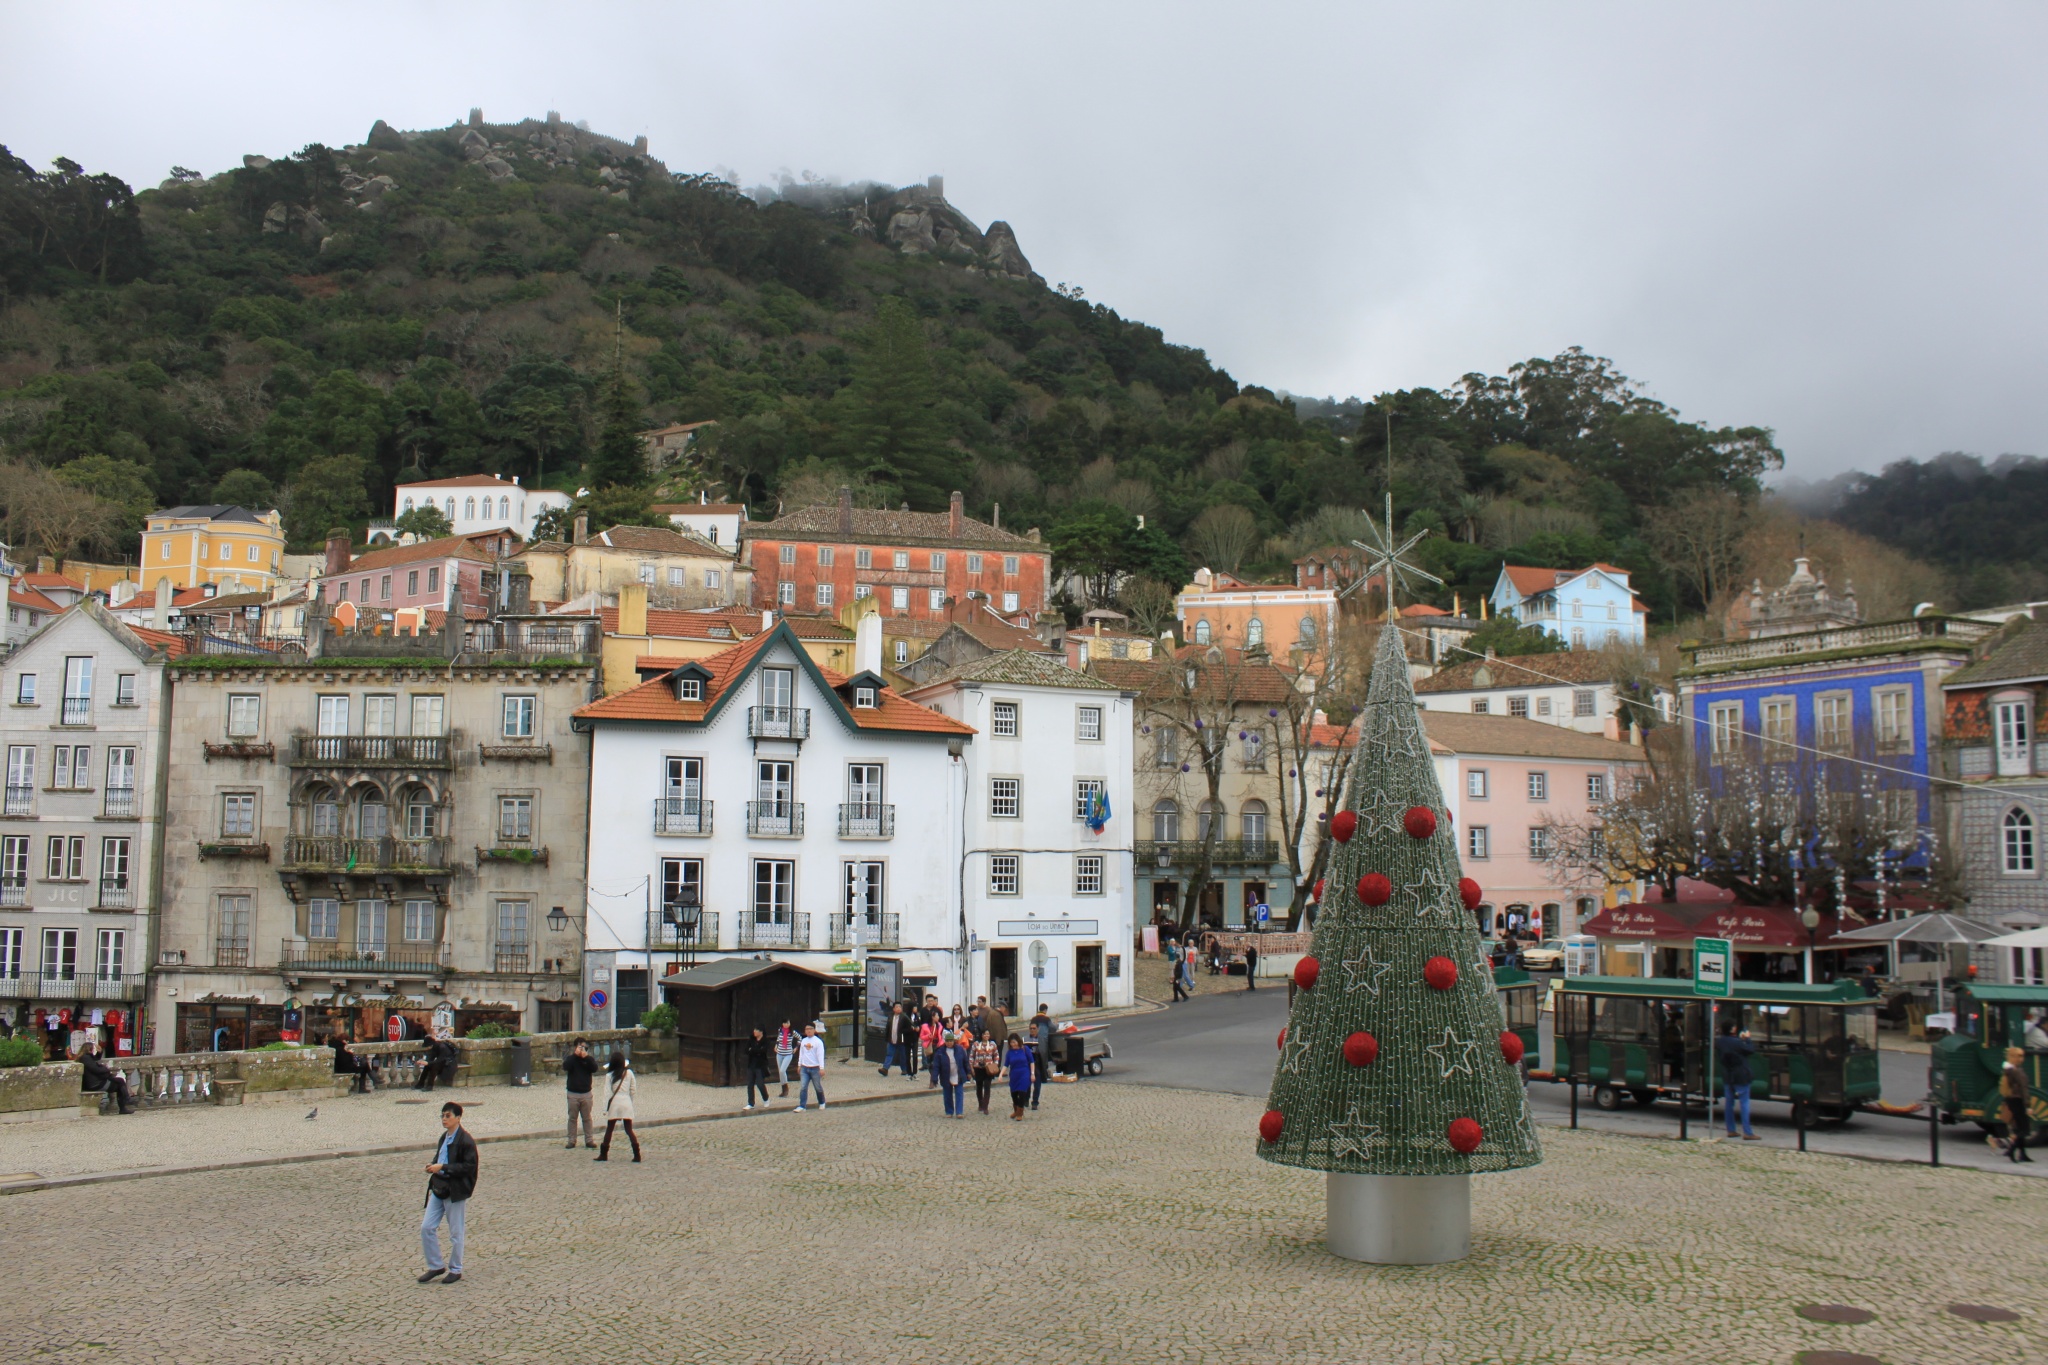 The Pena National Palace sits on a hill above the Sintra town square, featuring a steel, abstract Christmas tree.